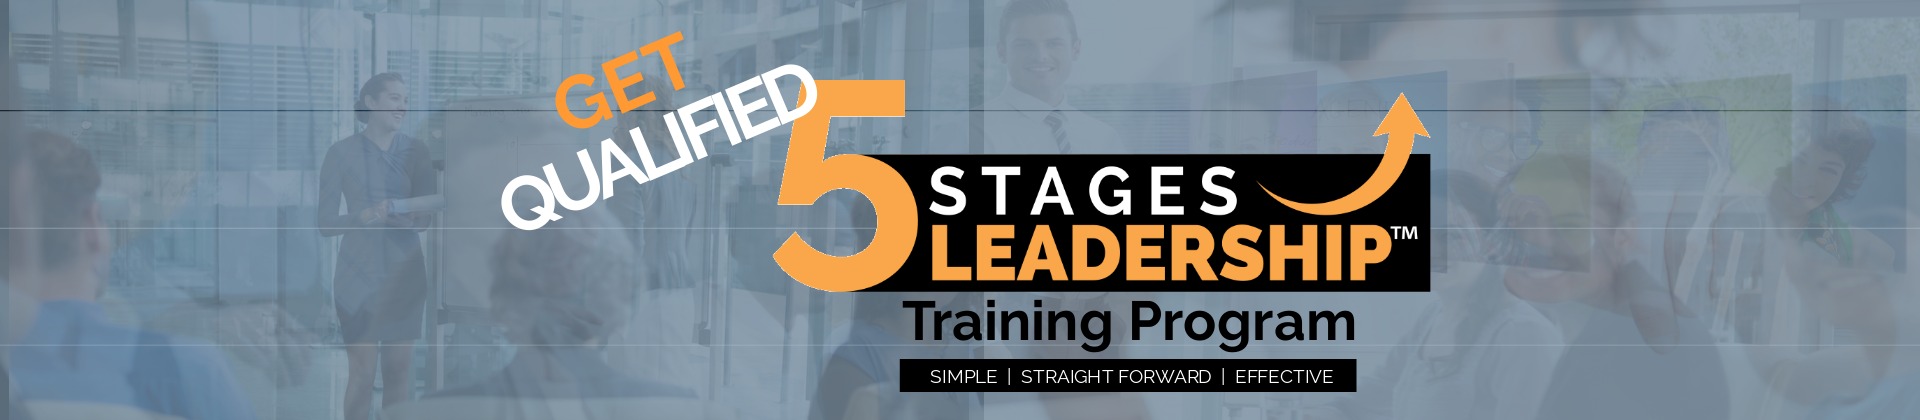 Get Certified for the 5 Stages Leadership™ Training Program